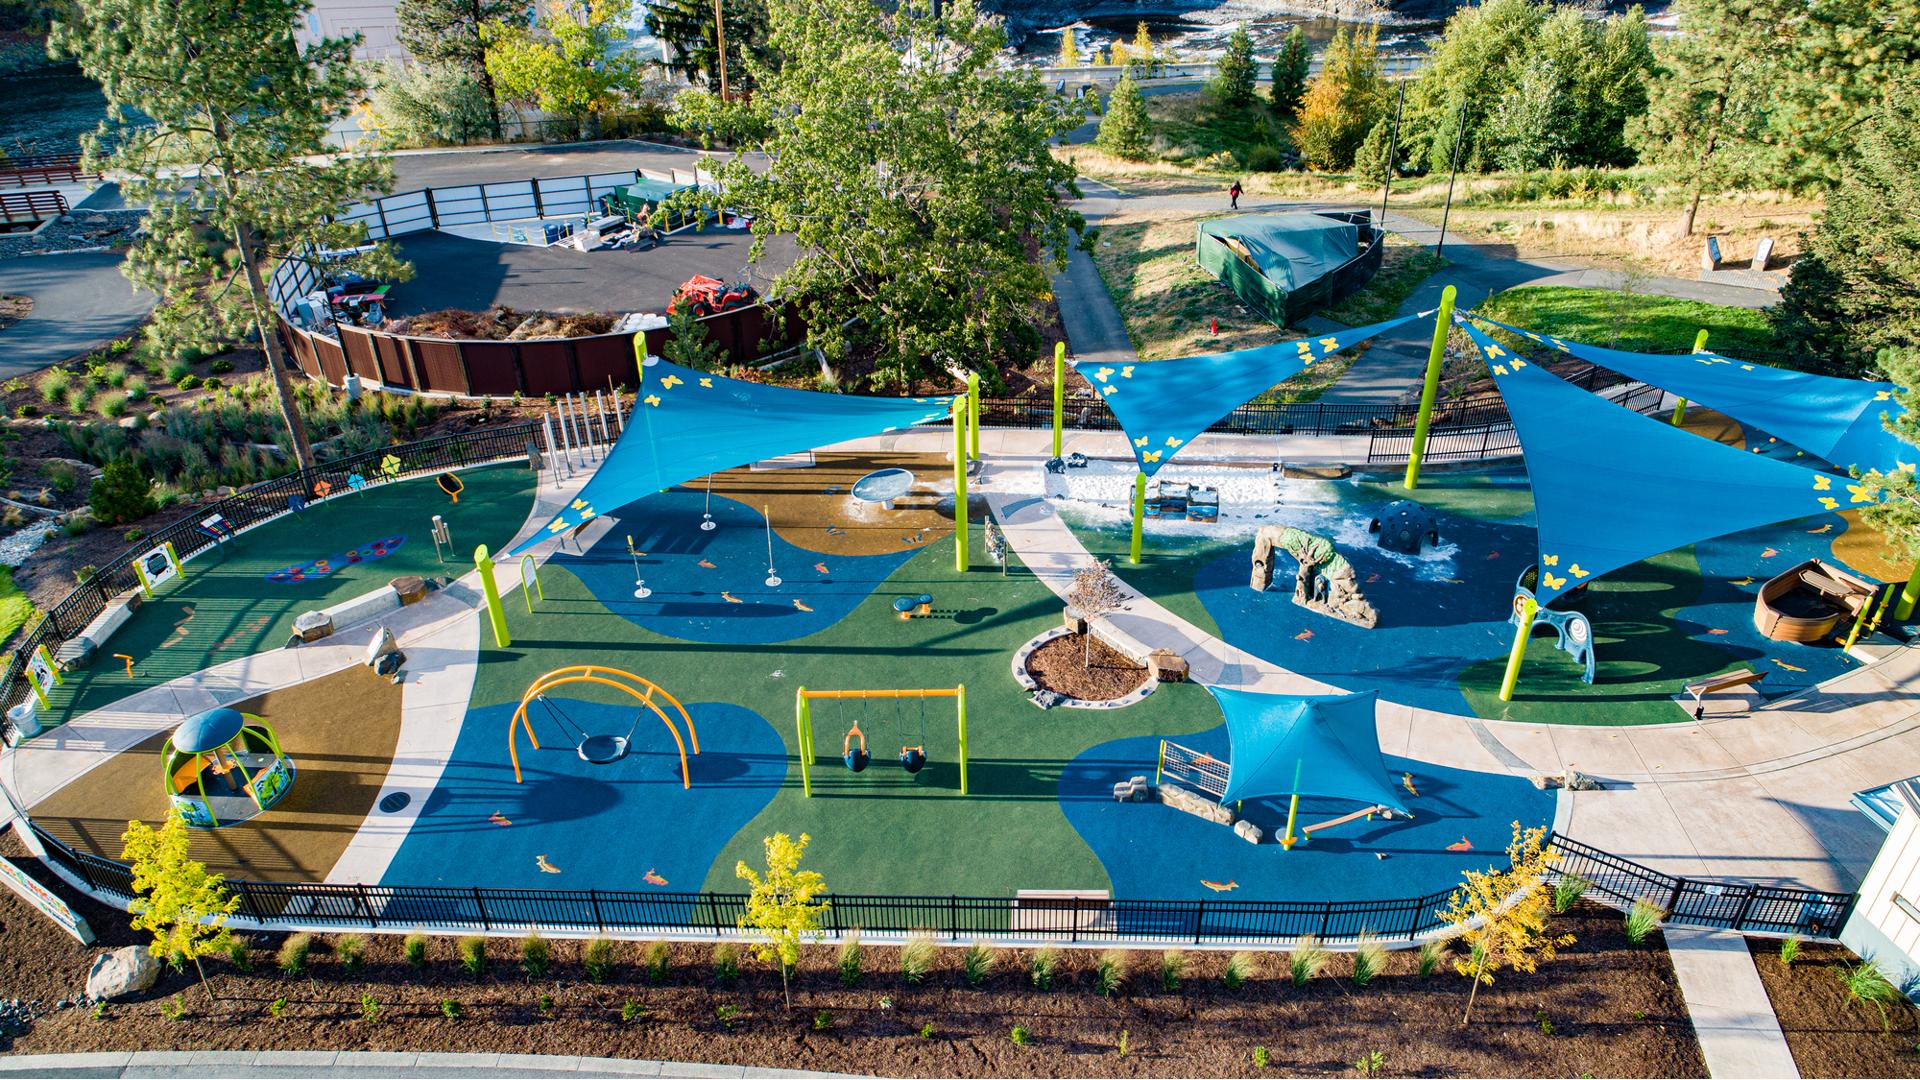 A large playground made up of smaller inclusive play activities with big fabric shade sails over the equipment. 